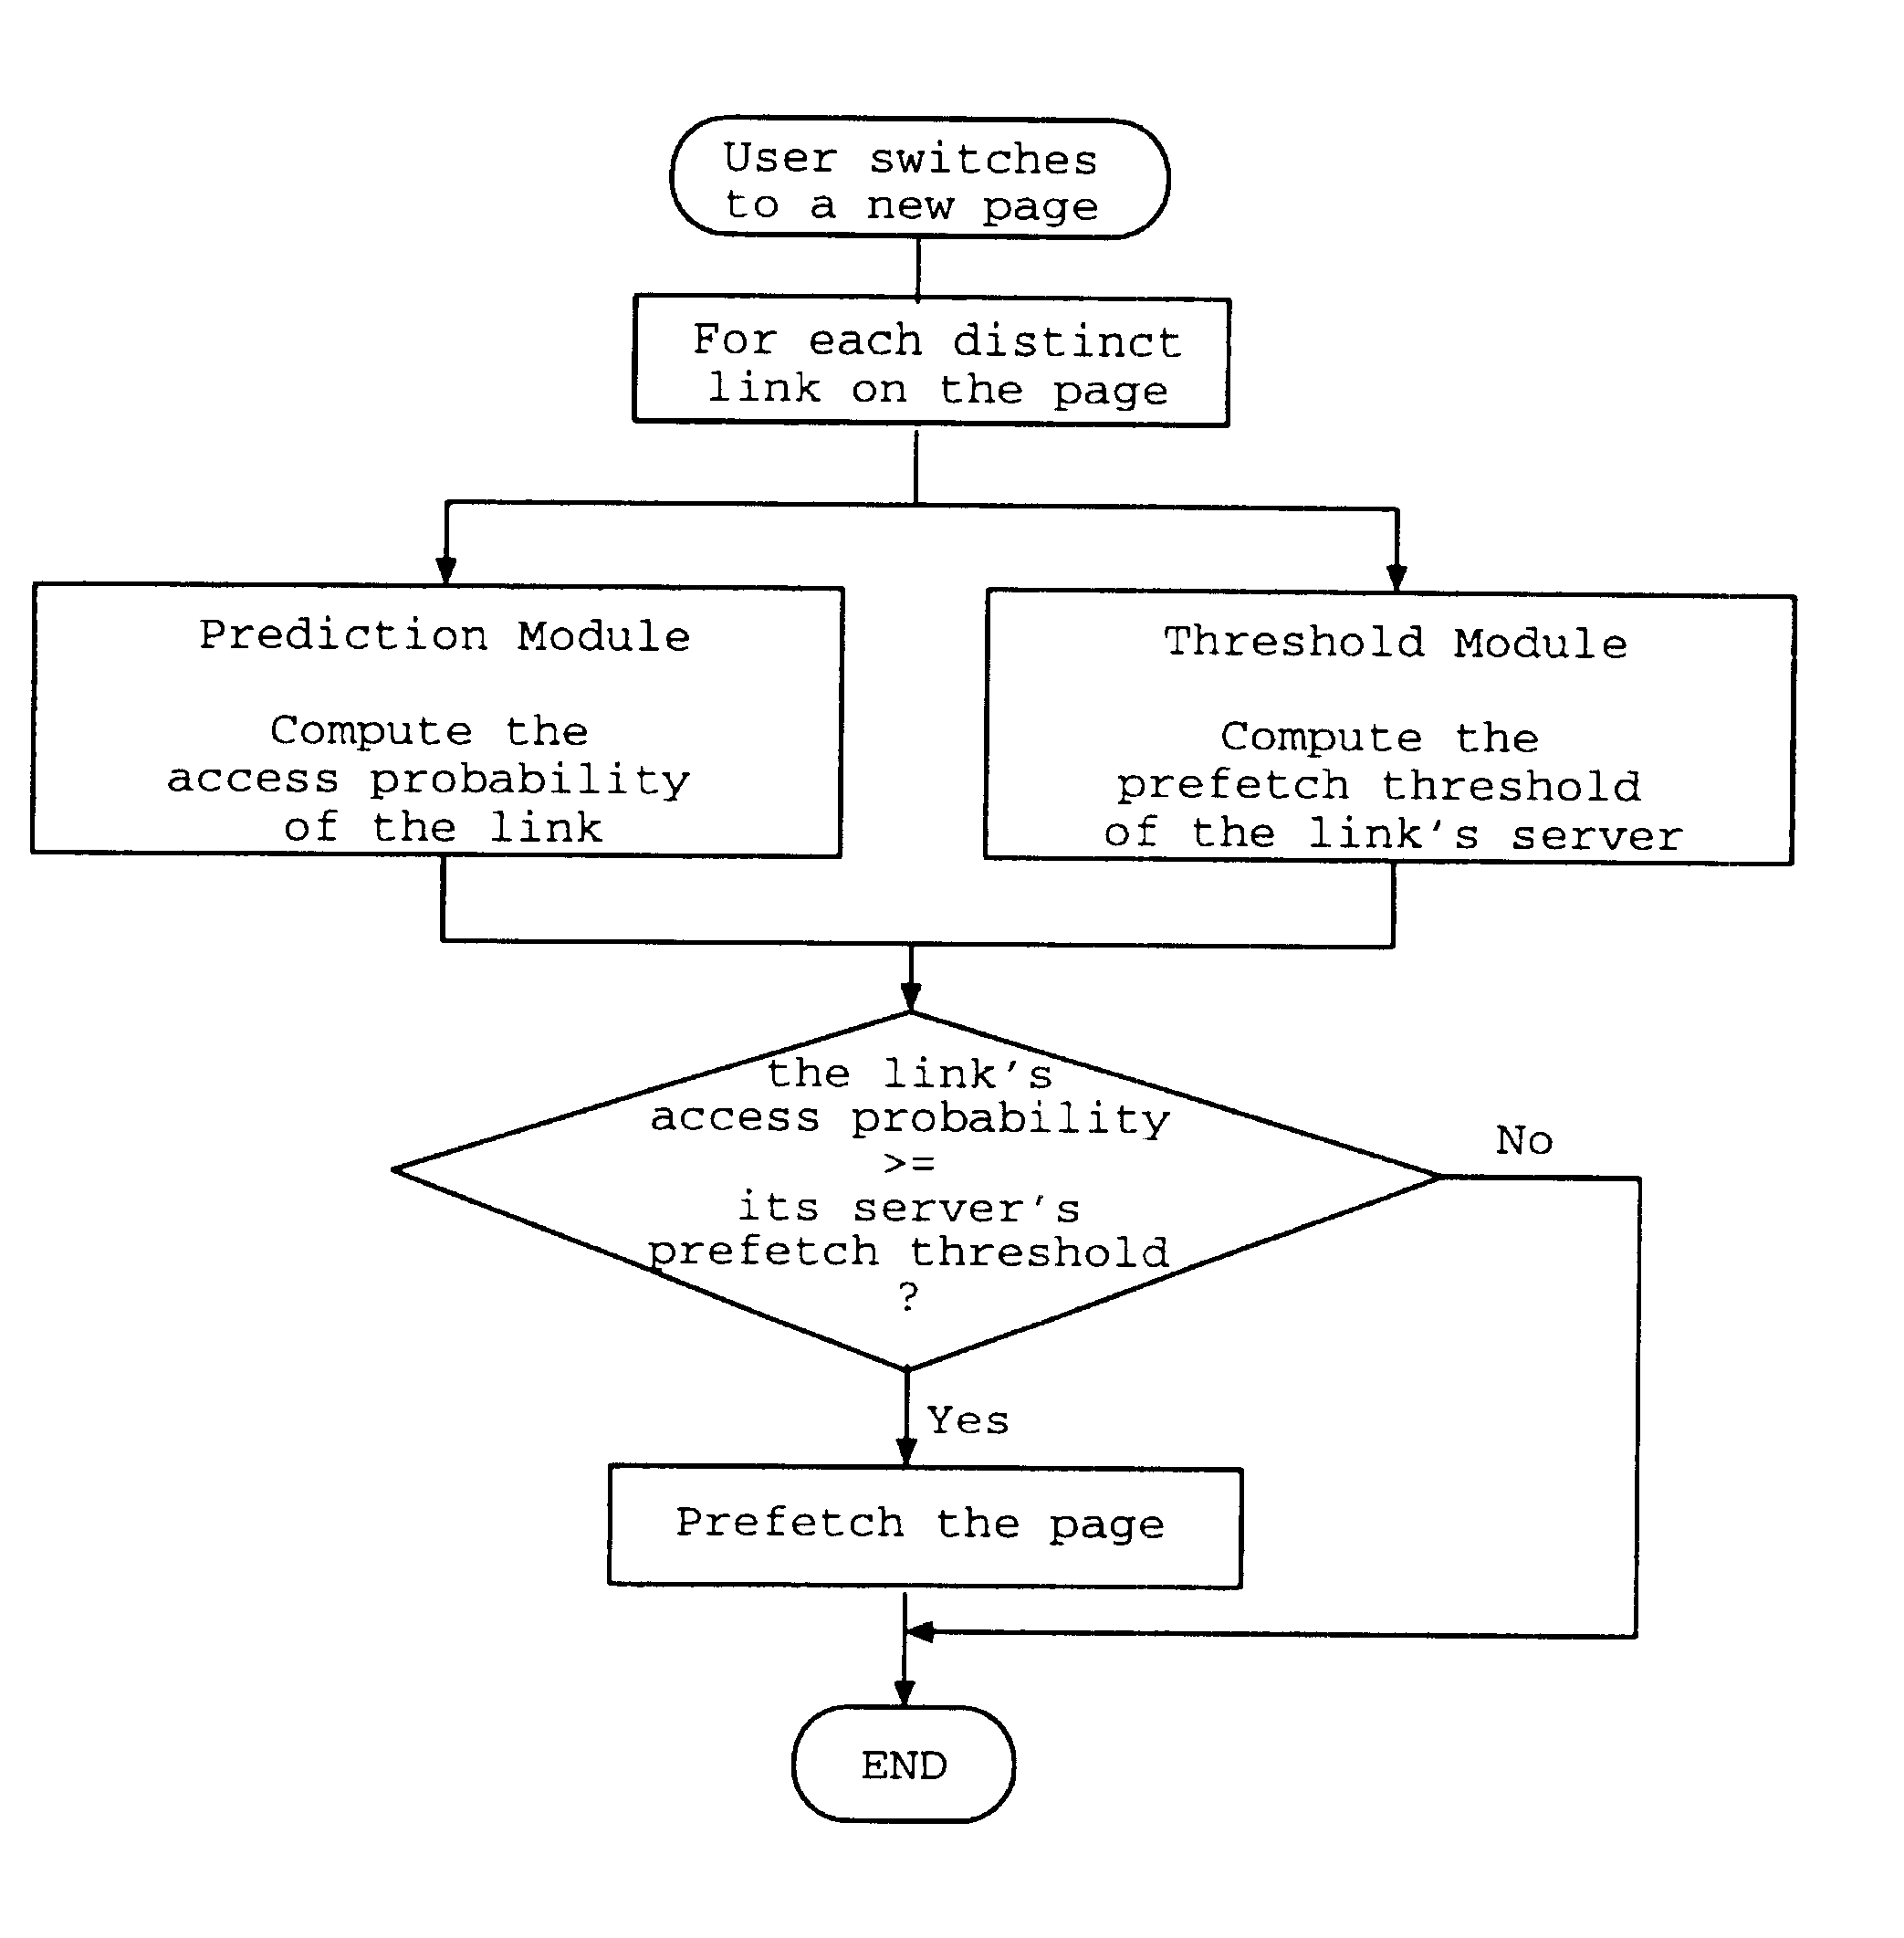 Adaptive prefetching for computer network and web browsing with a graphic user interface